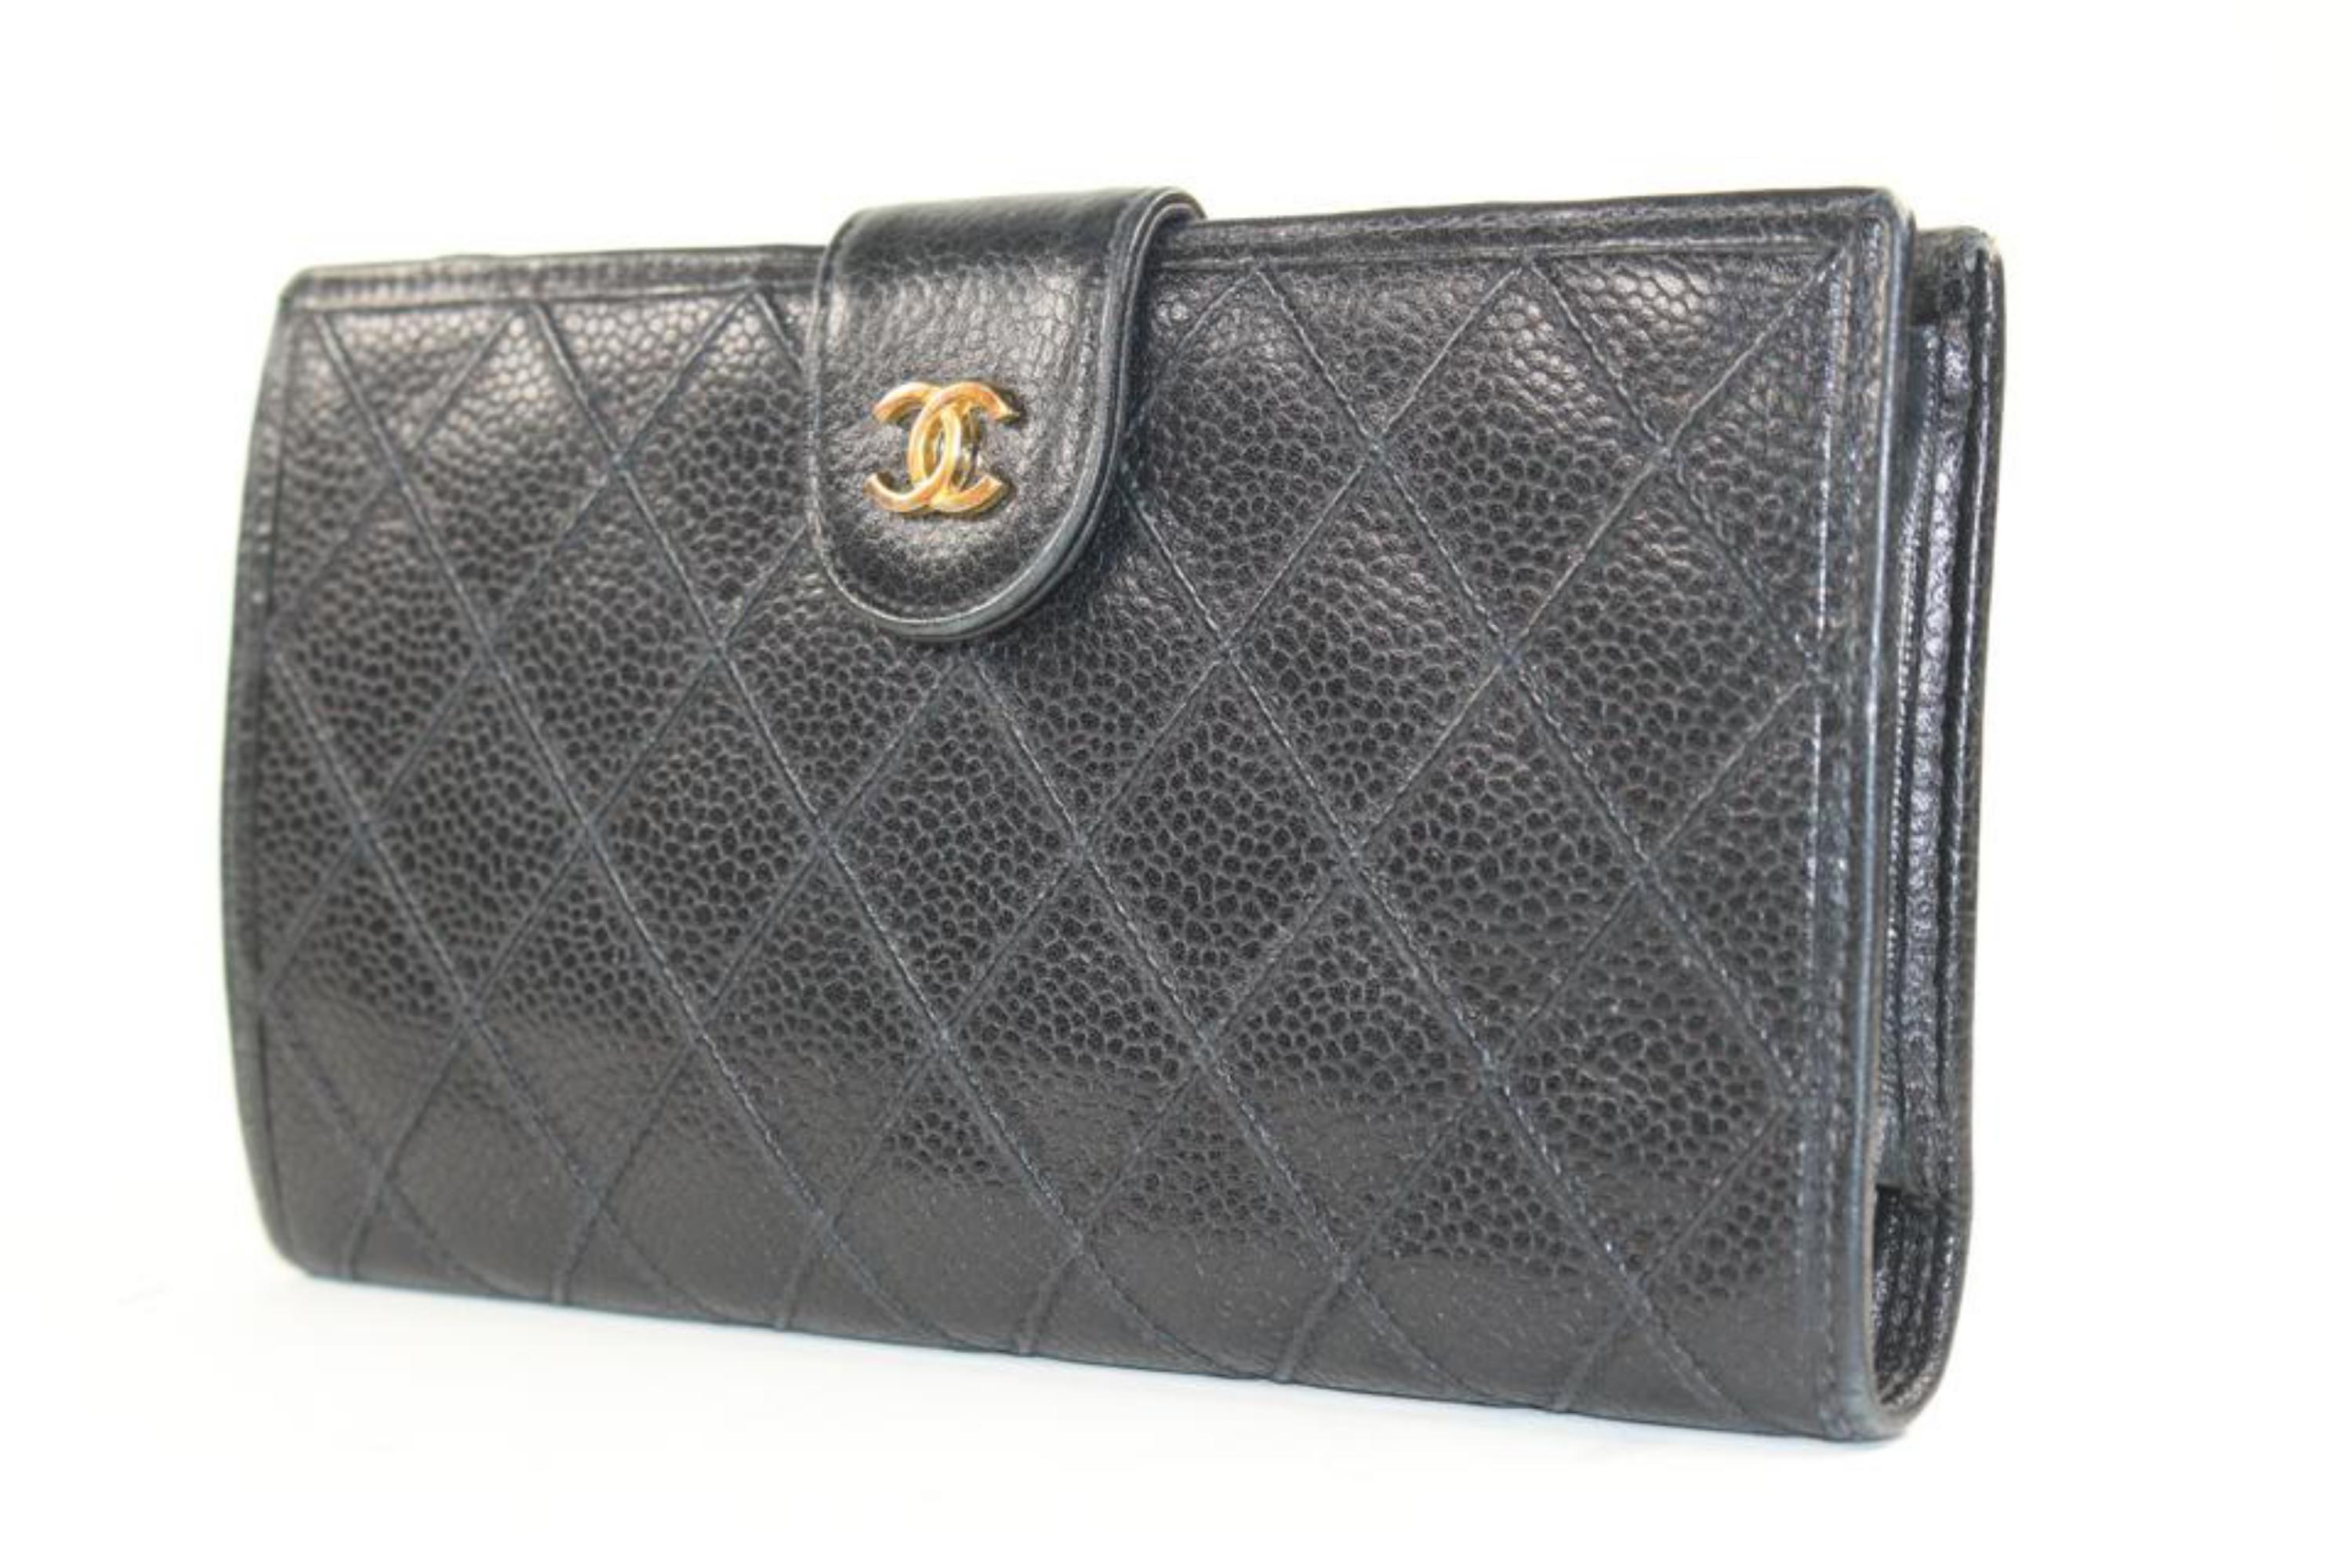 Chanel Black Quilted Caviar Leather CC Logo Long Wallet L Gusset 11C1021 8